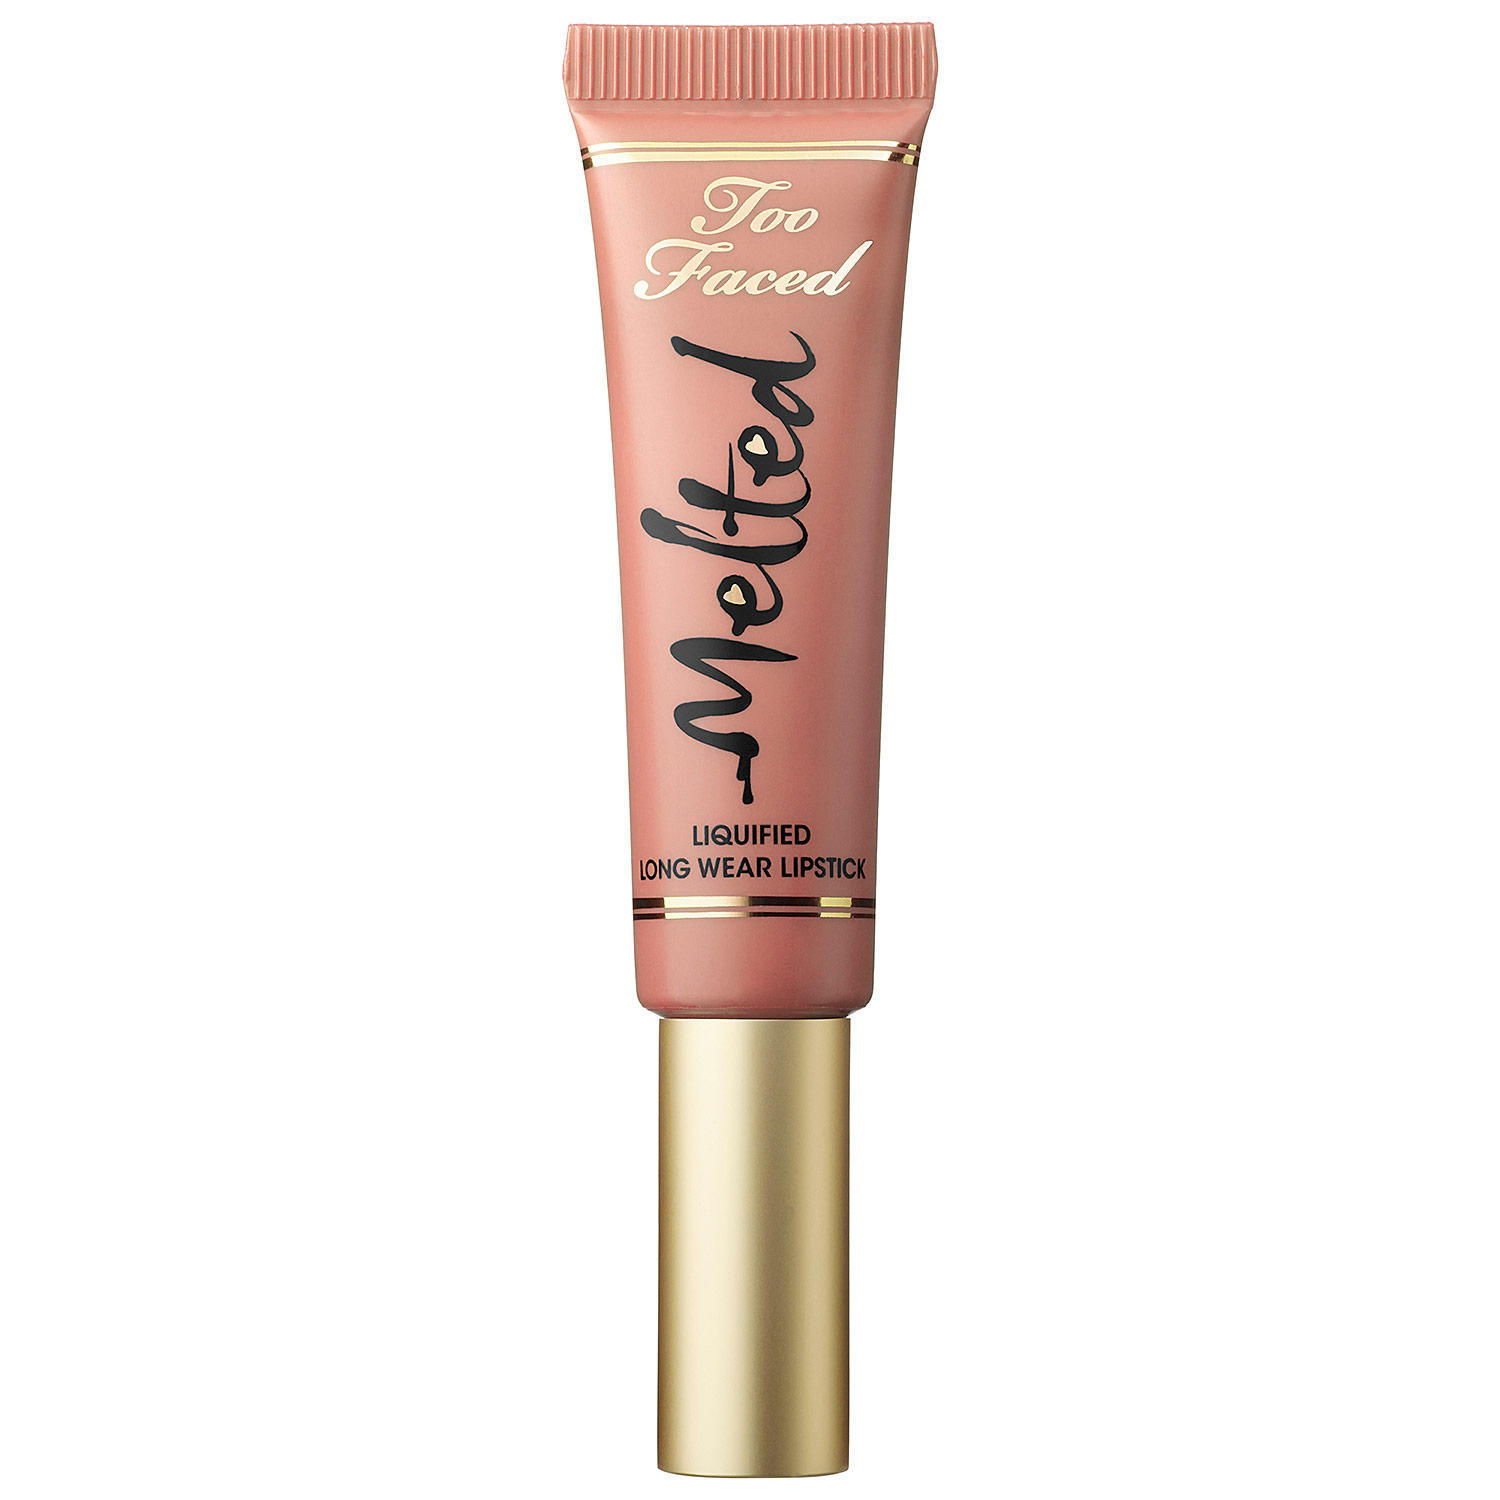 Too Faced Melted Liquified Long Wear Lipstick Melted Nude Mini 5ml